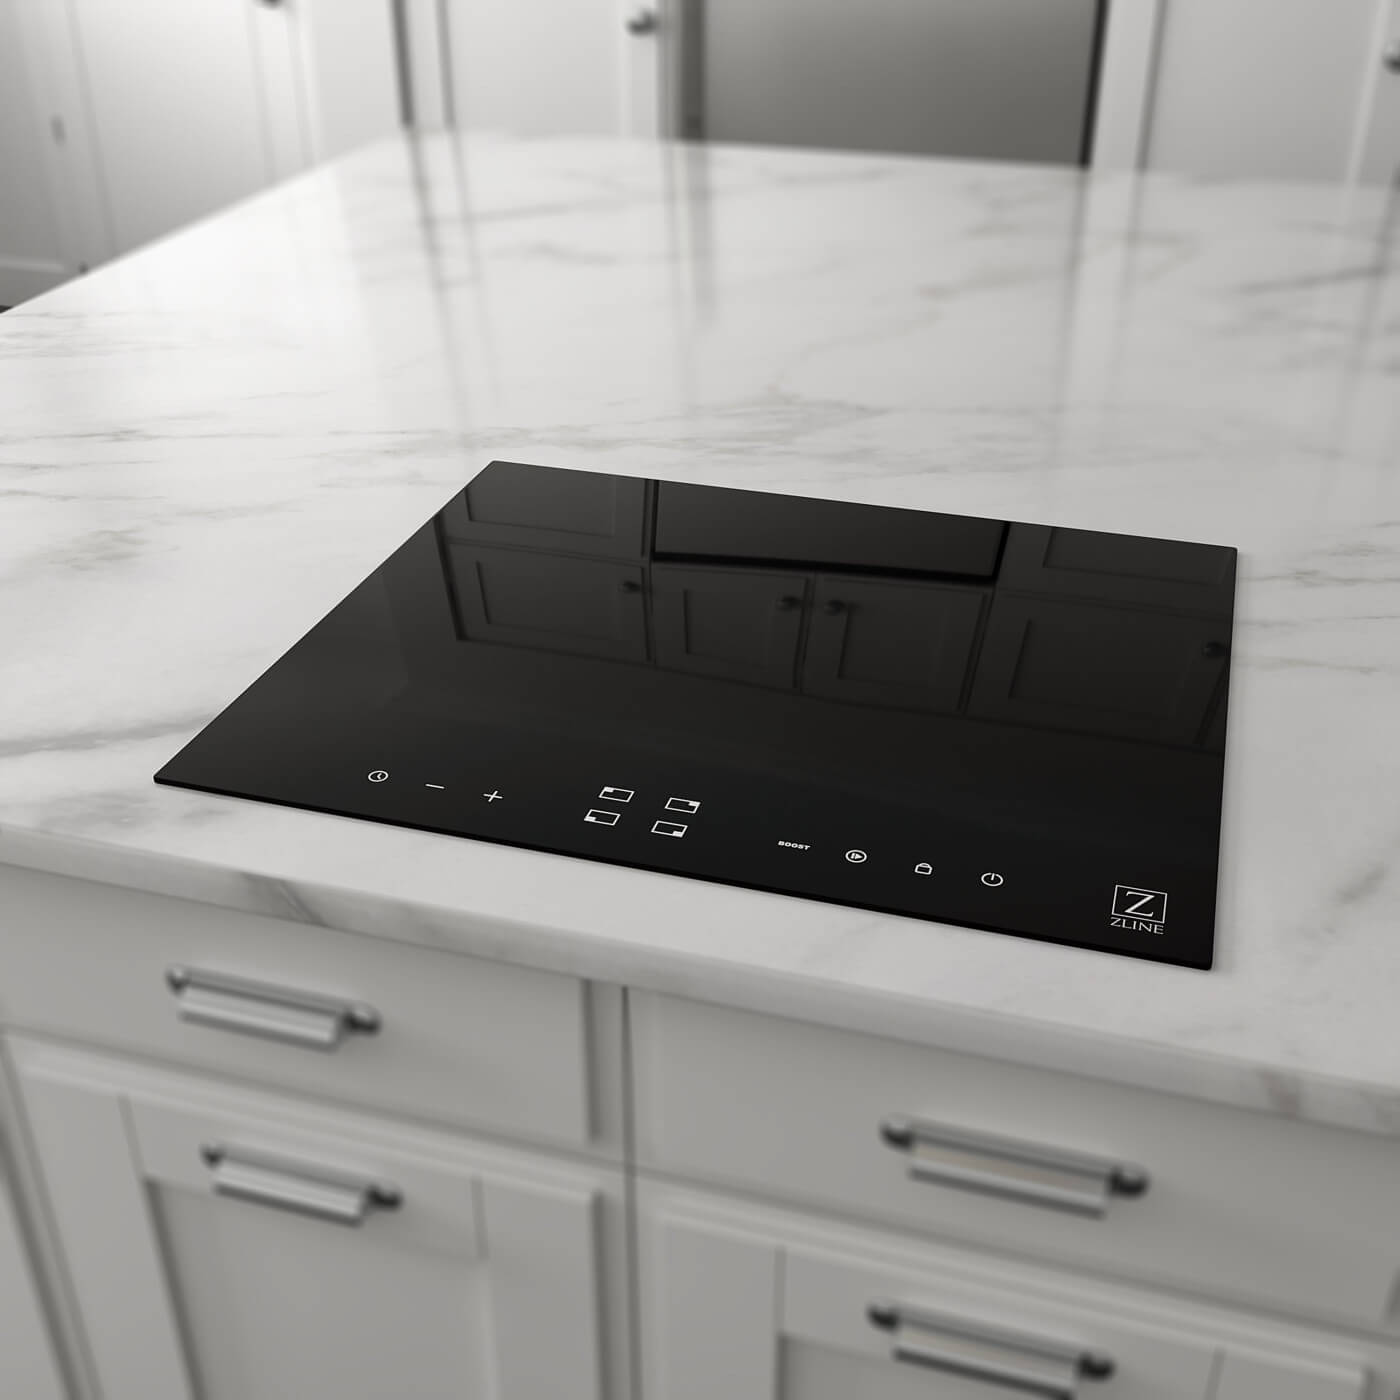 Small ZLINE Induction cooktop on marble kitchen island